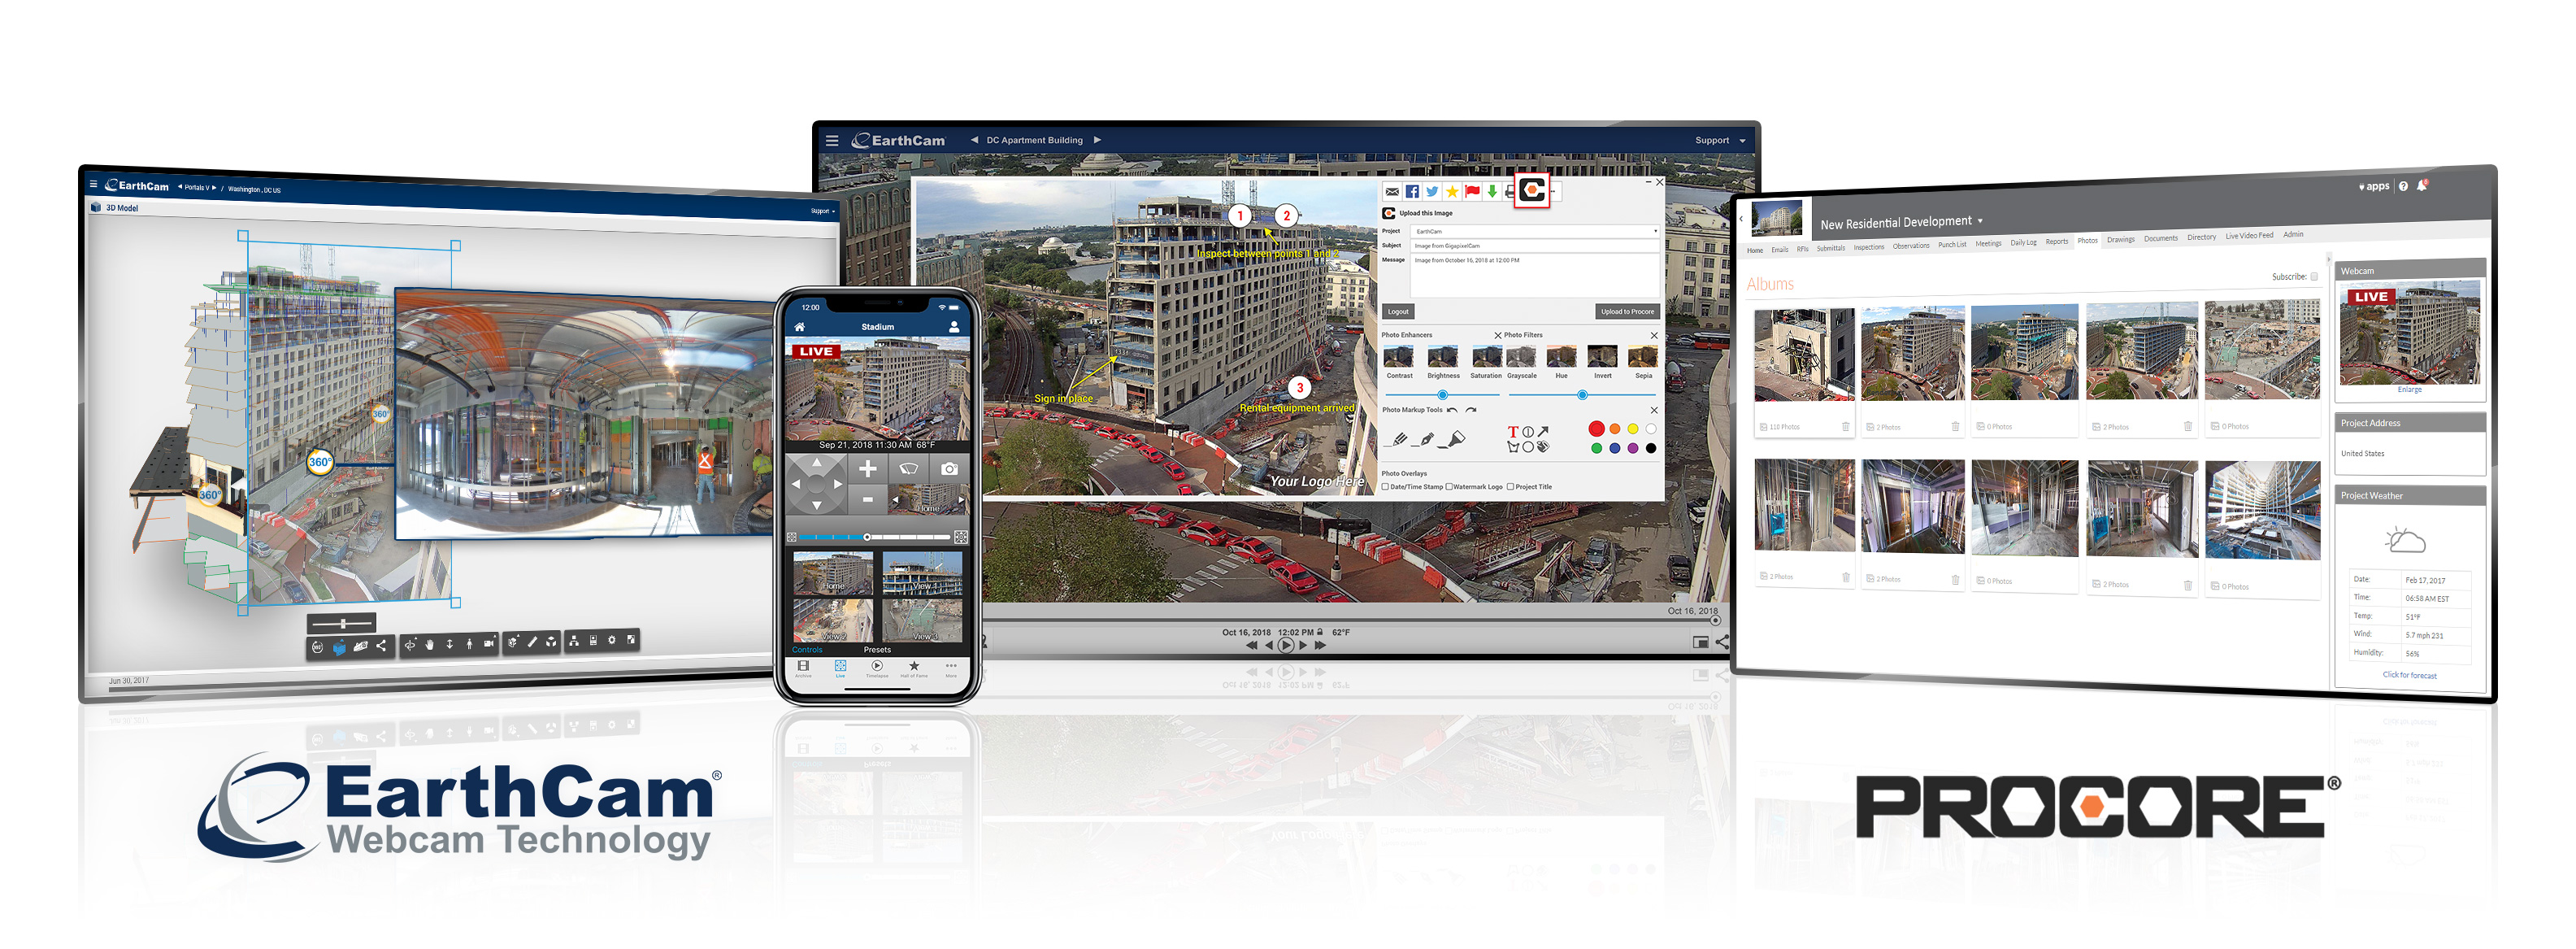 With EarthCam's expanded Procore integration, users can perform live comparisons between webcams, 360° VR photography and 2D, 3D or 4D models.